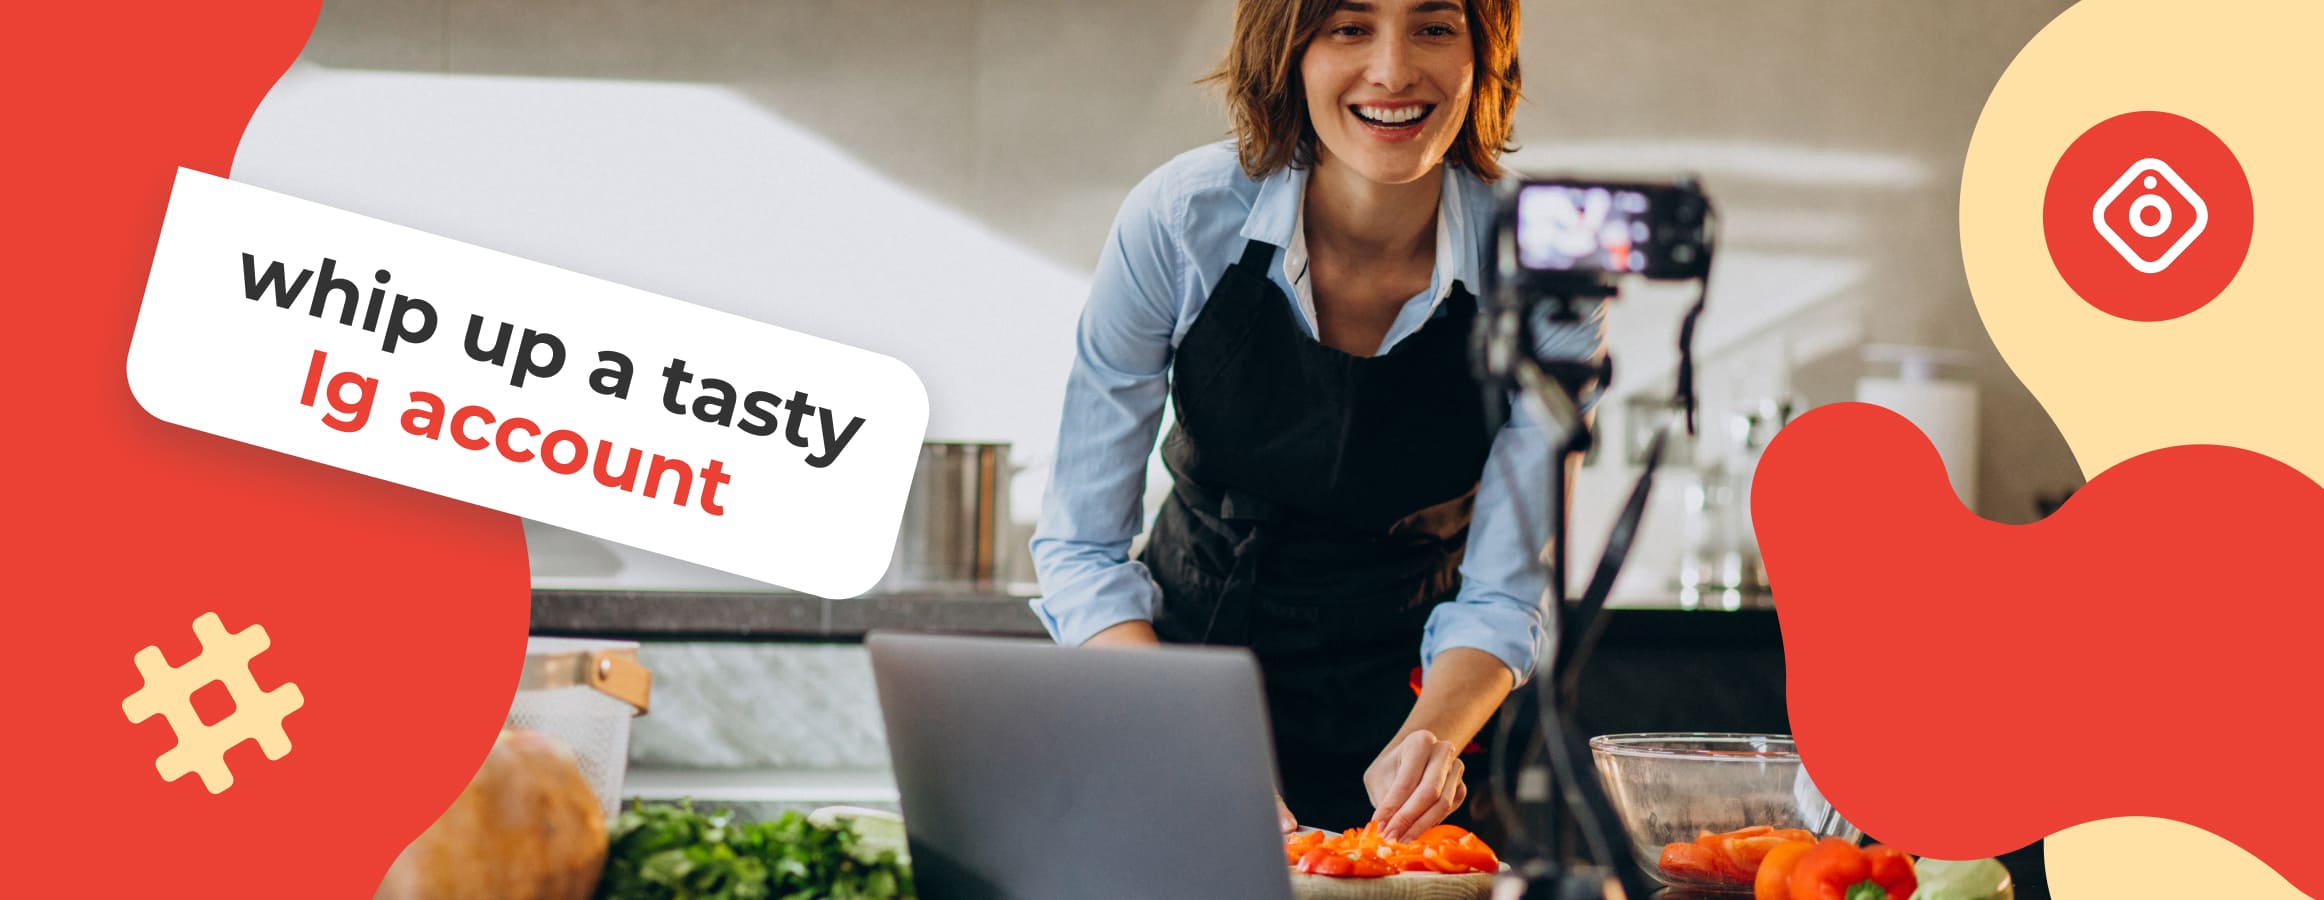 5.How to Become a Food Influencer_ Ideas for Tasty Instagram Accounts.jpg